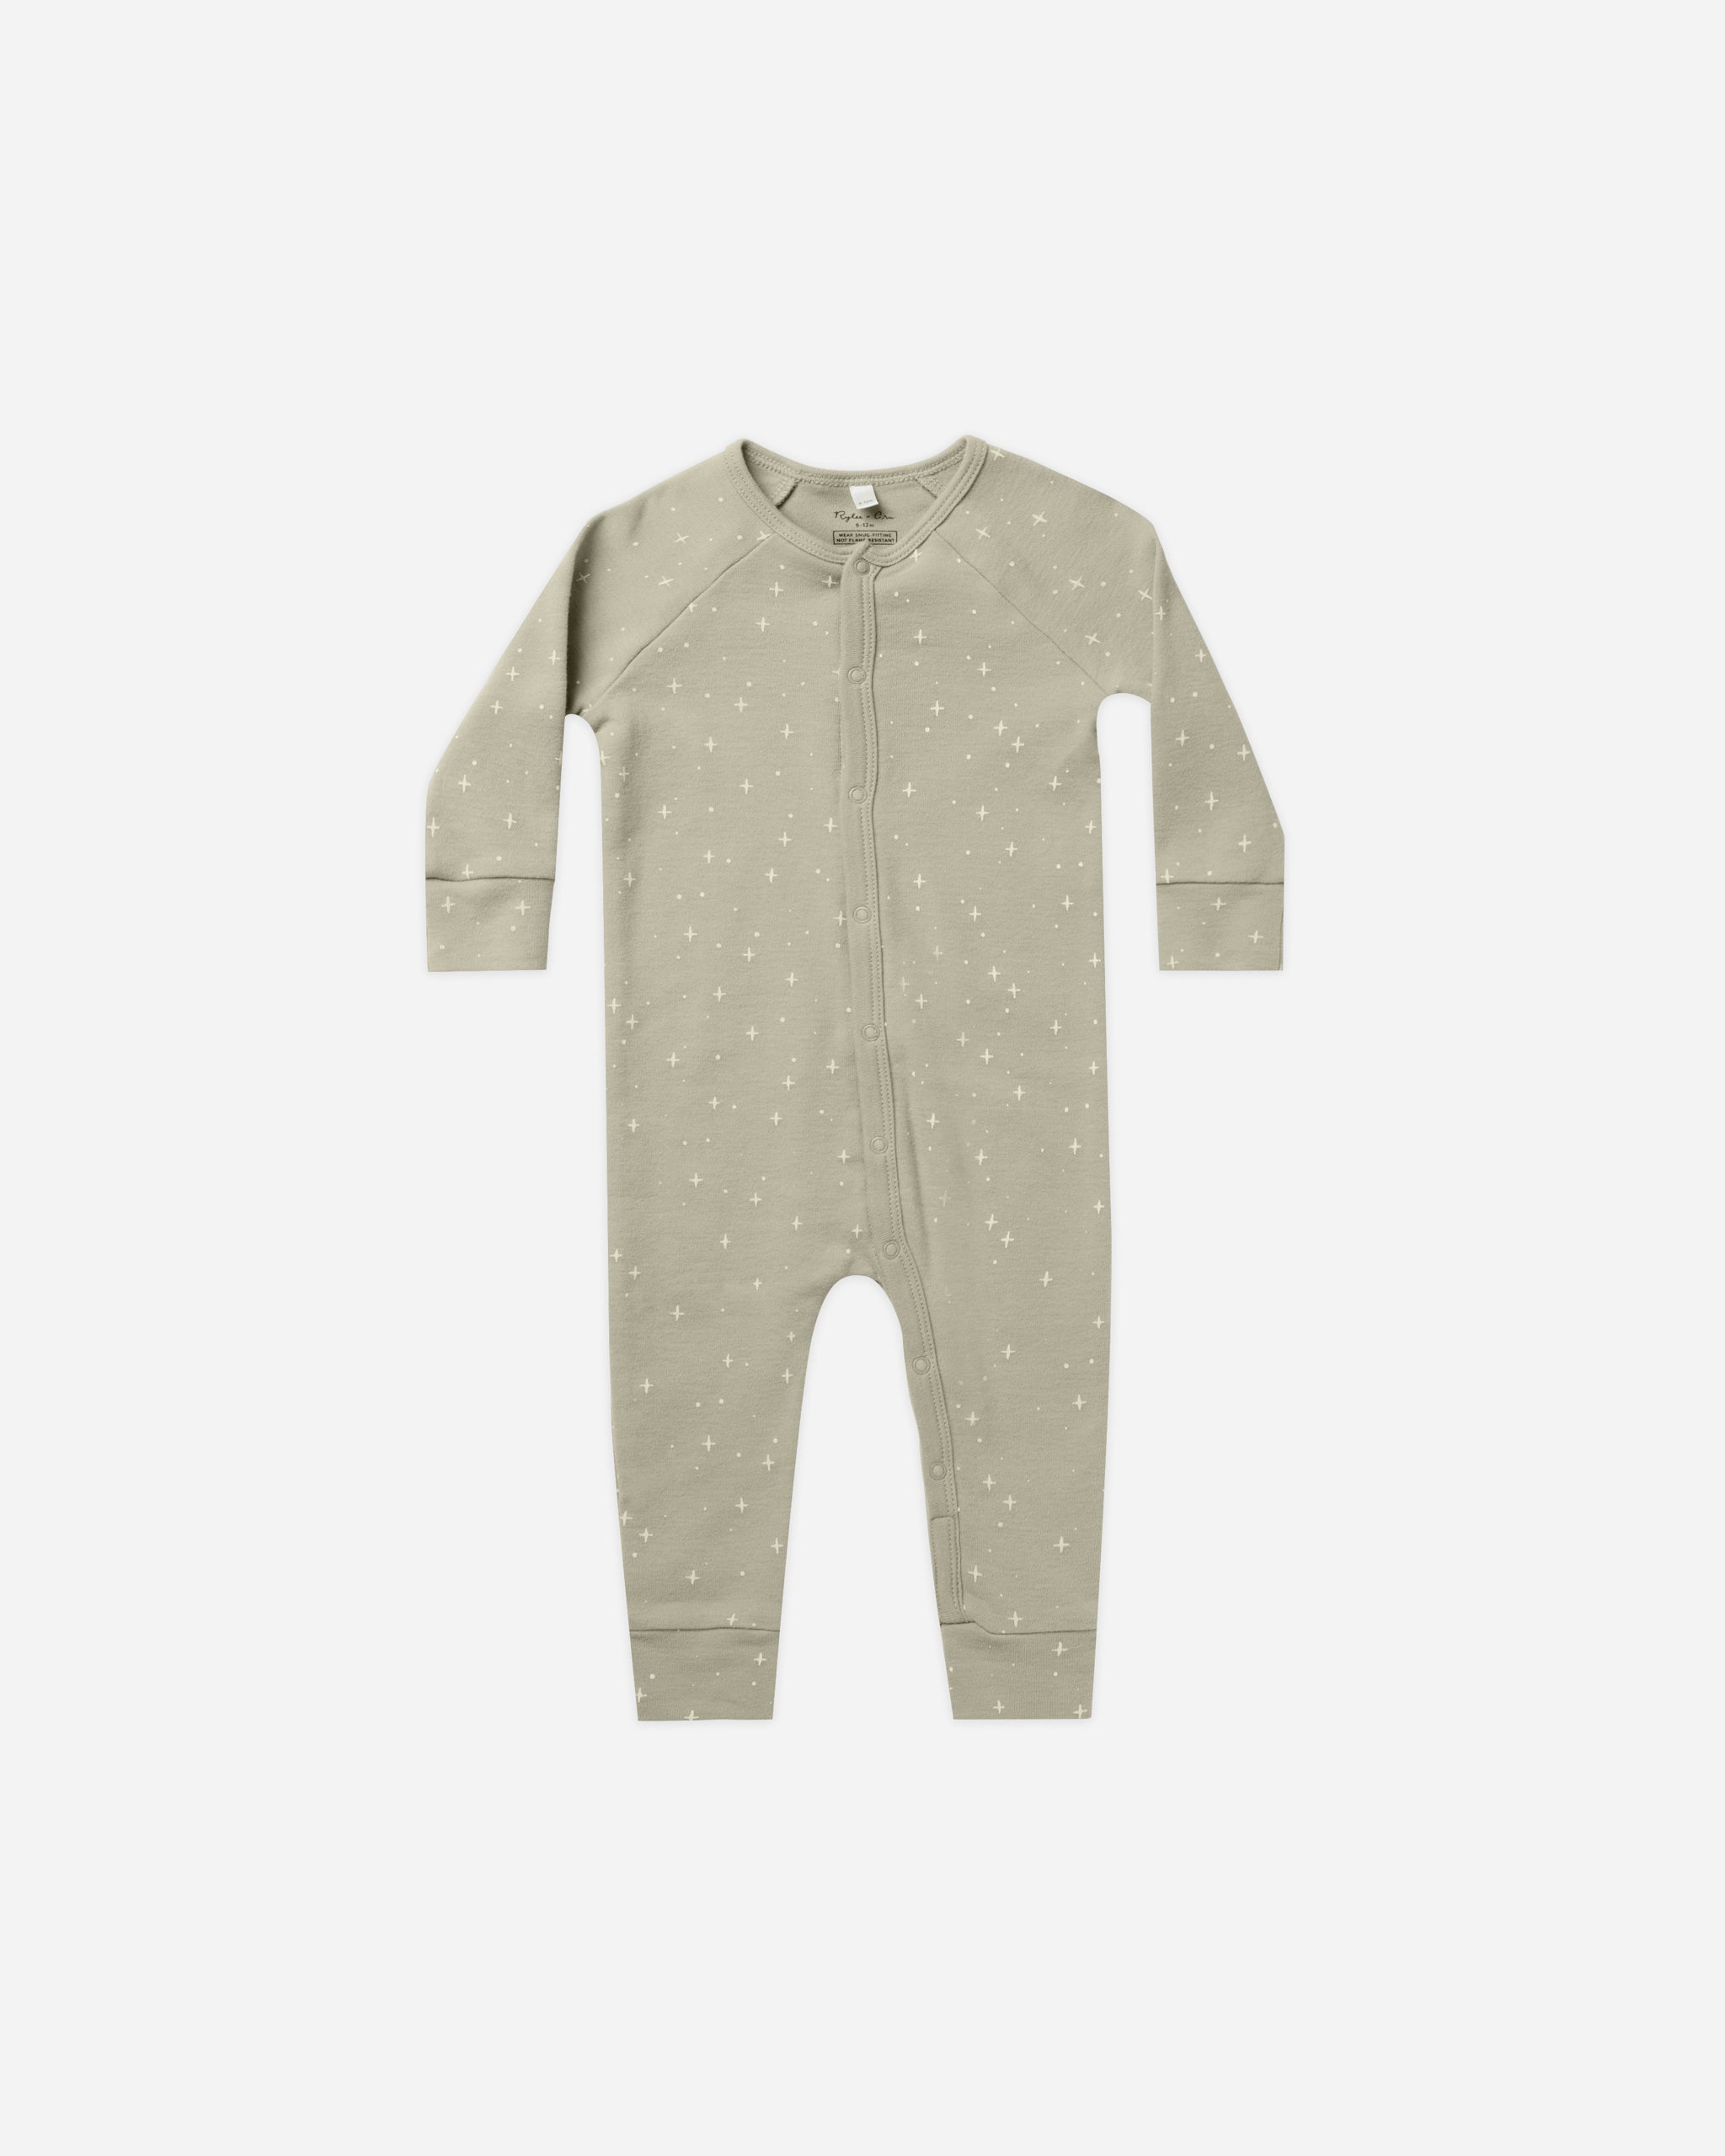 Organic Pajama Long John || Twinkle - Rylee + Cru | Kids Clothes | Trendy Baby Clothes | Modern Infant Outfits |